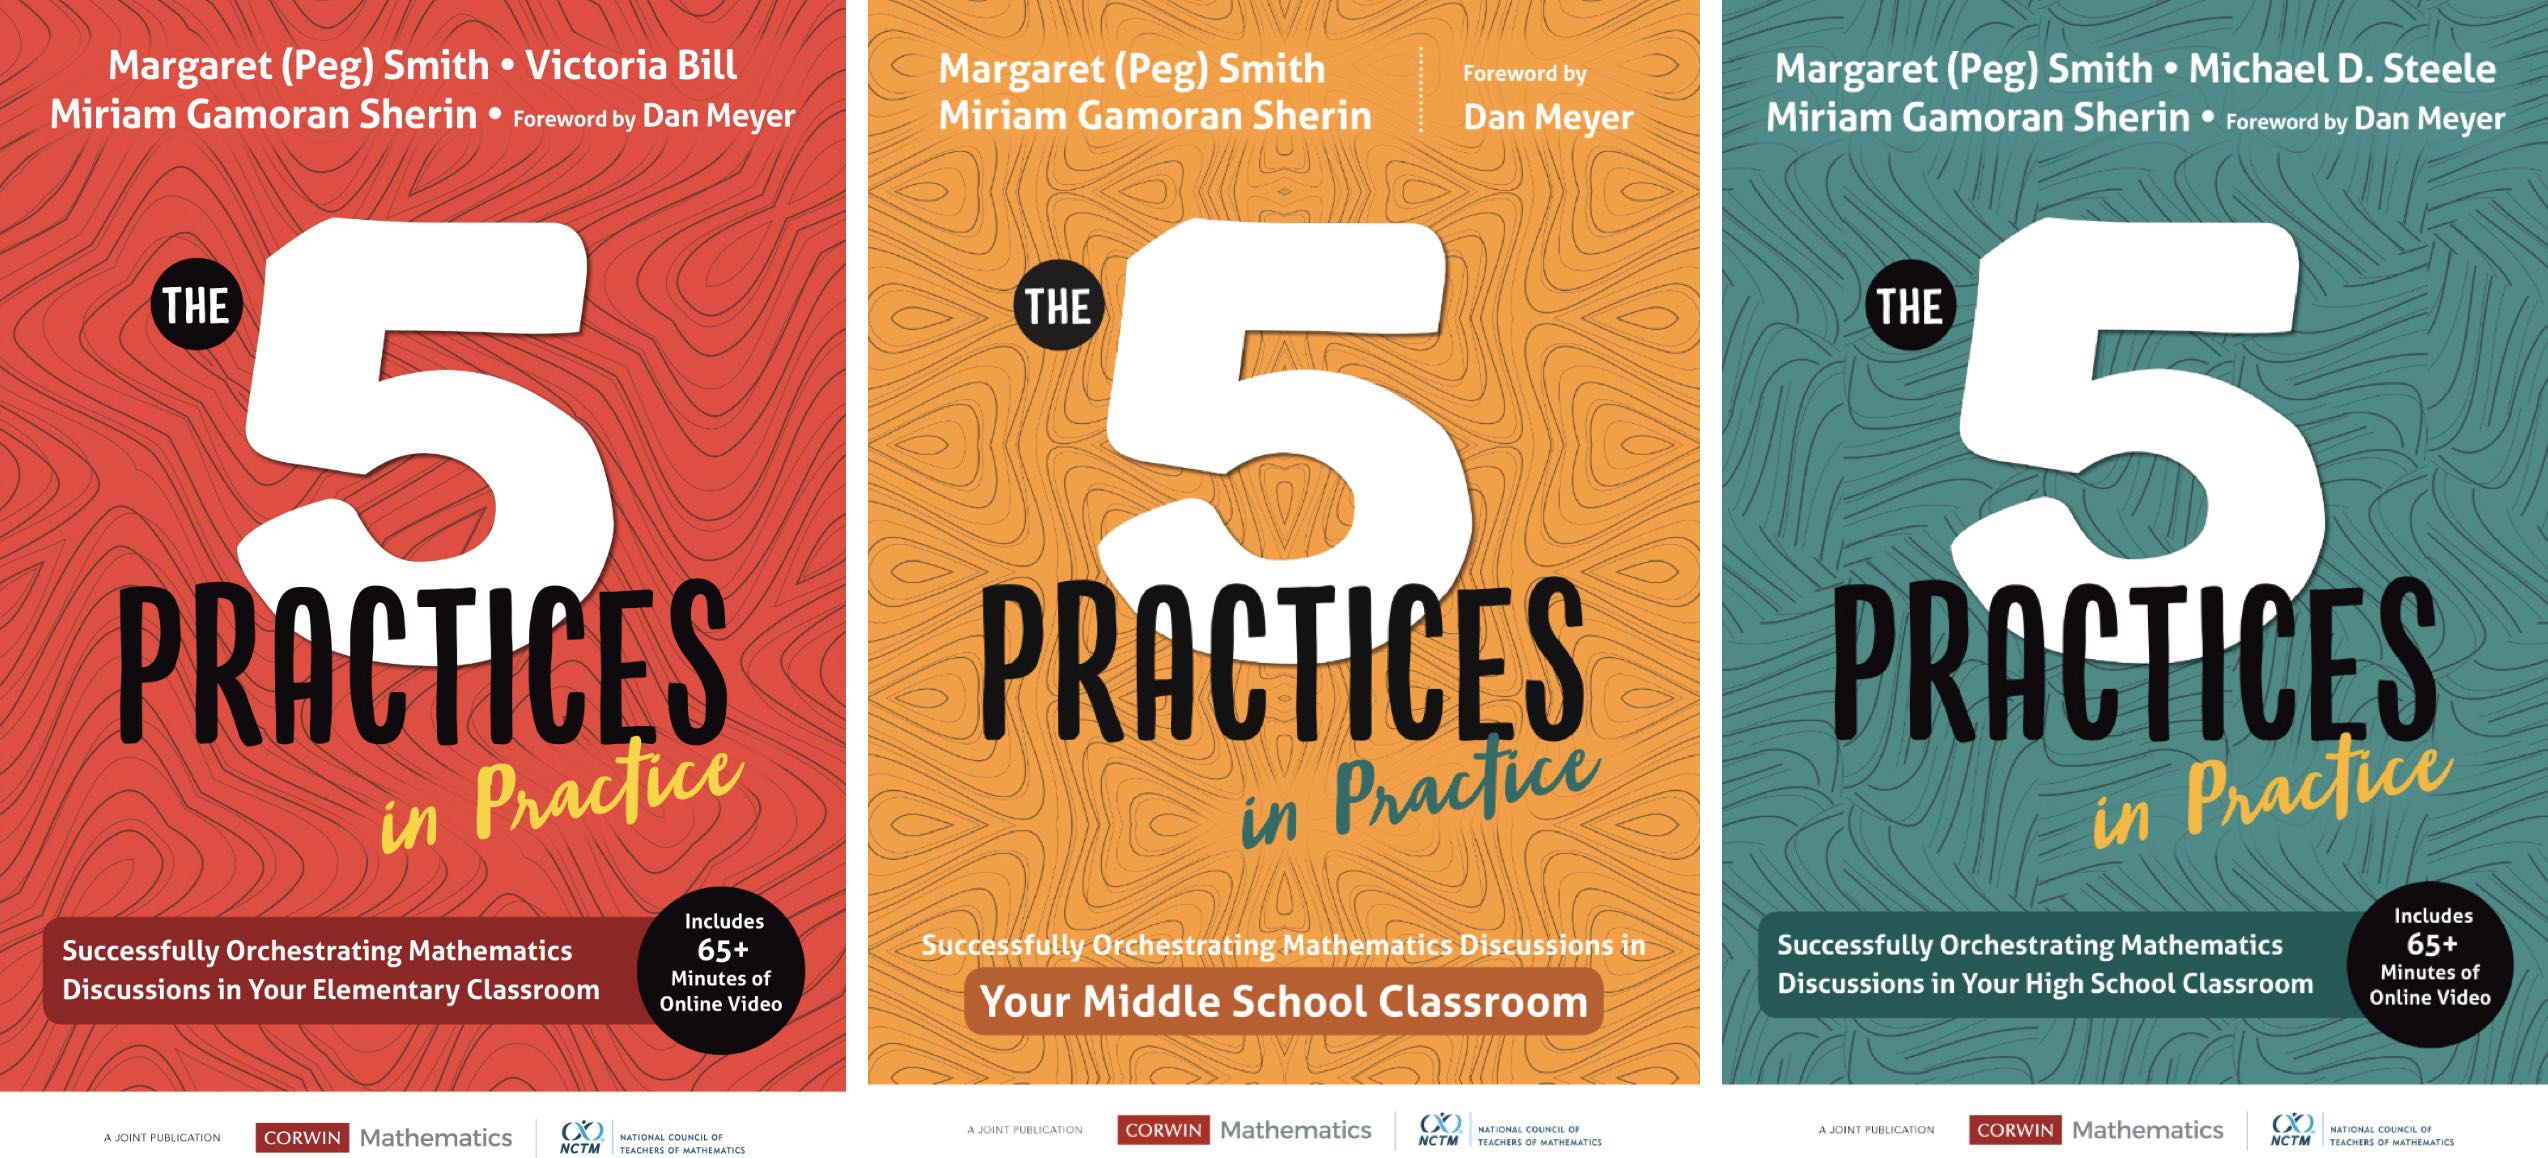 The 5 Practices in Practice: Successfully Orchestrating Mathematics Discussions eBooks Now Available